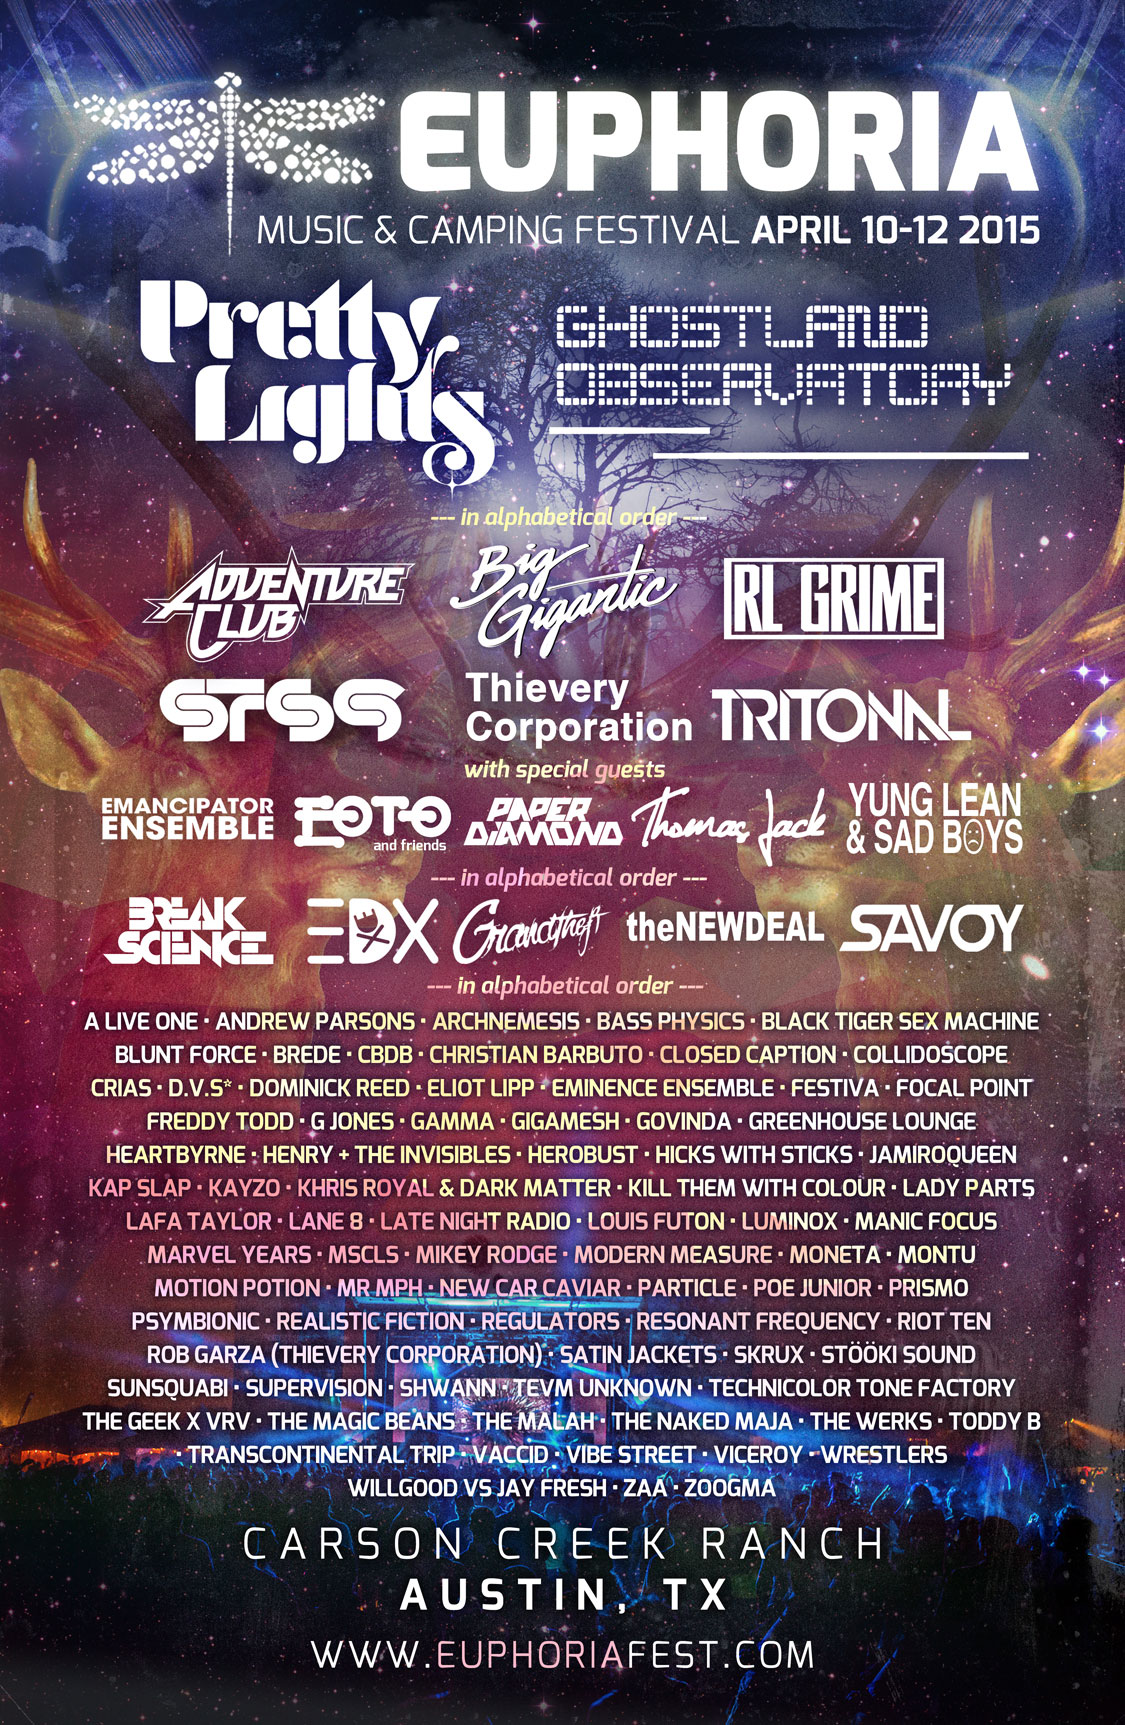 Euphoria Music Fest Adds Big Gigantic, Tritonal, RL Grime and More to the Lineup